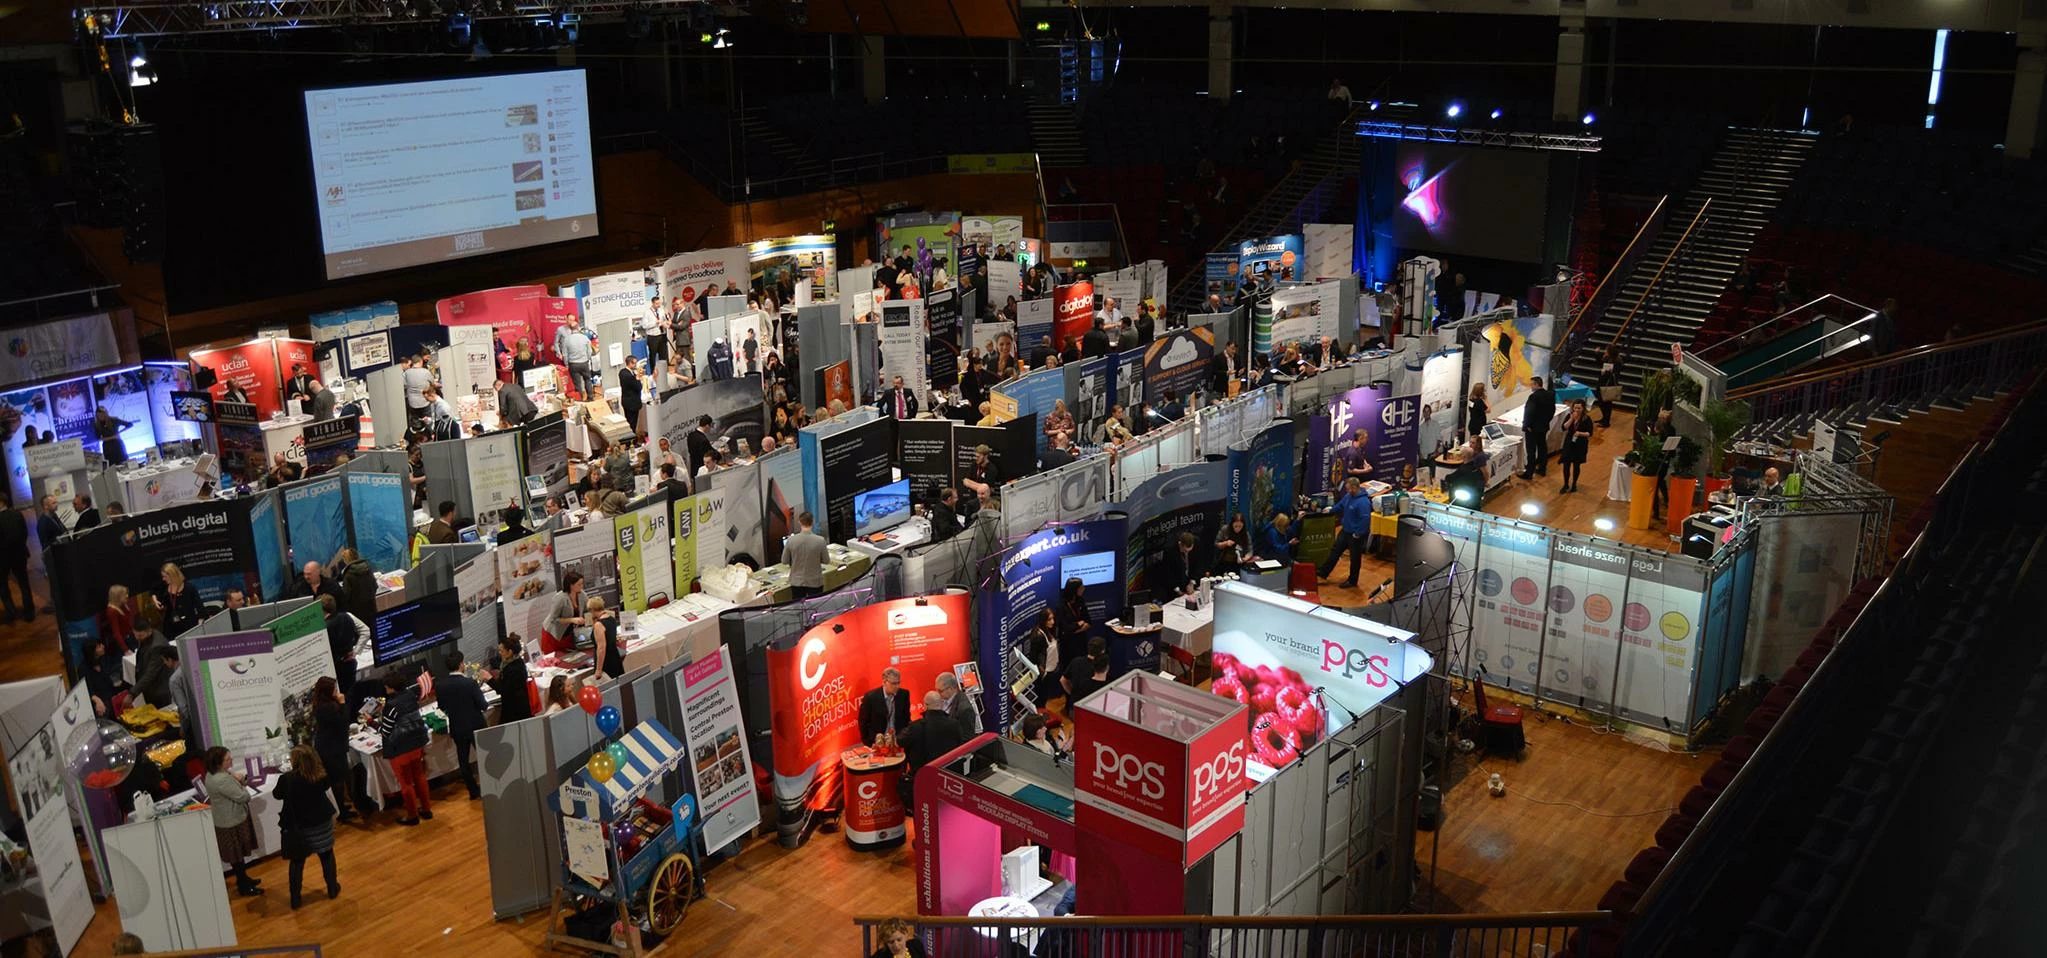 Lancashire Business Expo 2016 at the Guild Hall in Preston